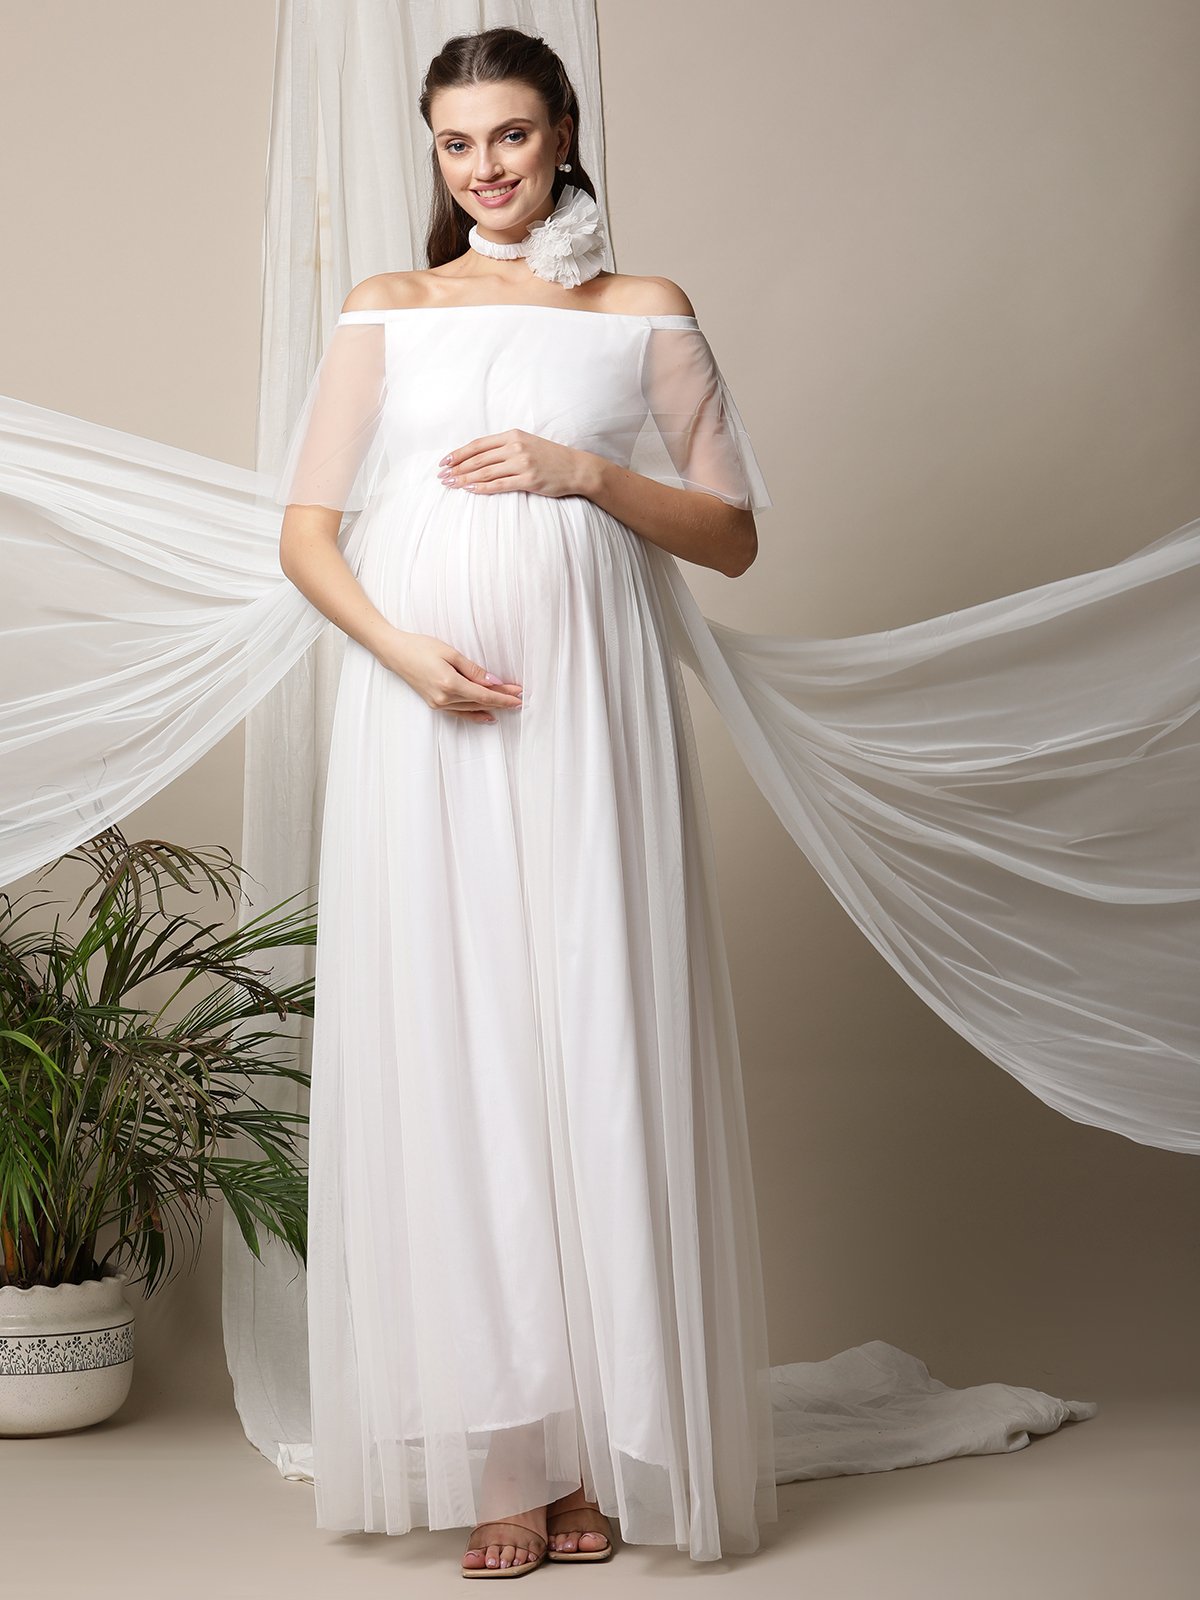 Maternity Dress For Photography One Shoulder Ruffles Crop Top Pregnancy  Photography Props Trumpet Skirt Set | Wish